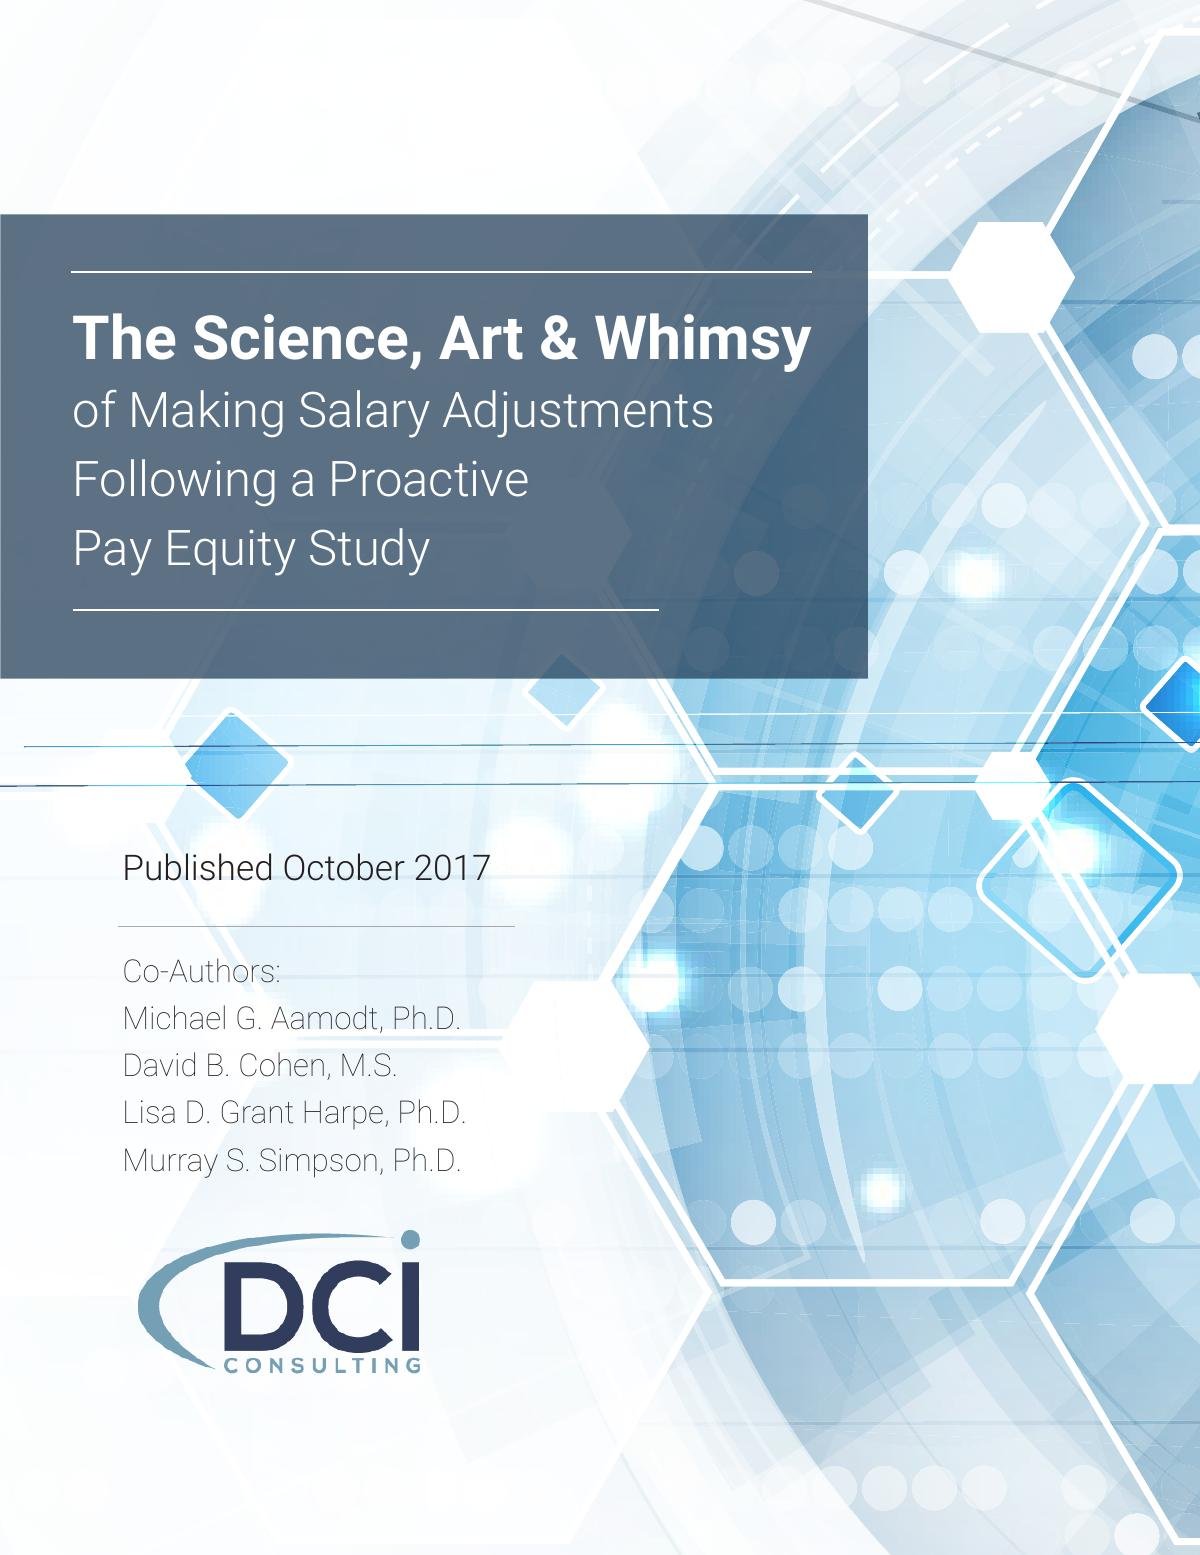 The Science, Art, & Whimsy of Making Salary Adjustments Following a Proactive Pay Equity Study